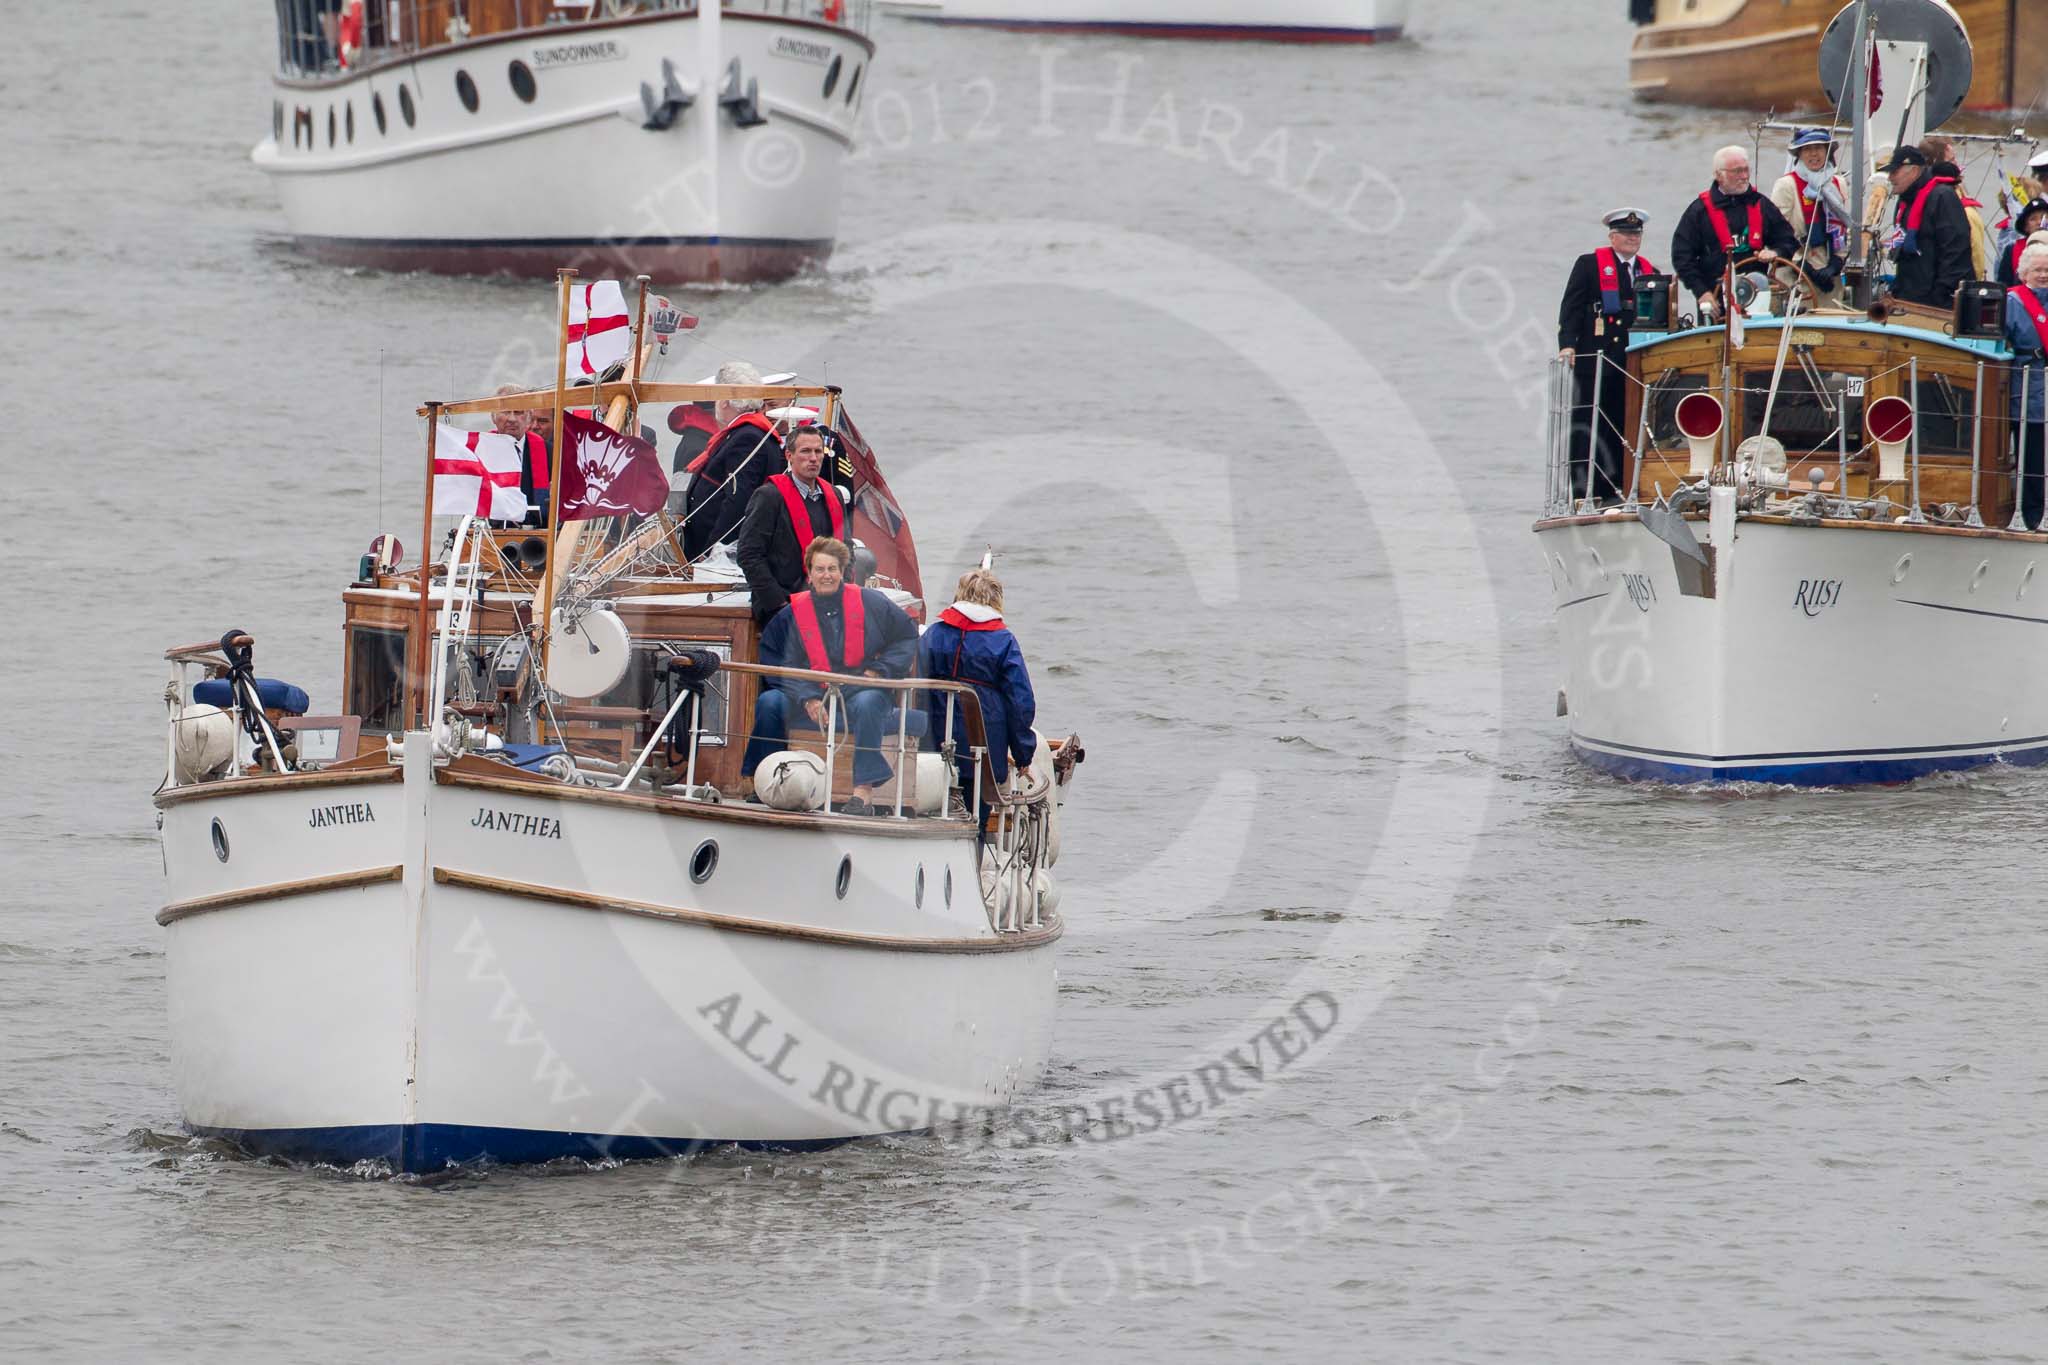 Thames Diamond Jubilee Pageant: DUNKIRK LITTLE SHIPS-Janthea (H3) and Riis 1 Hertfordshire (H7)..
River Thames seen from Battersea Bridge,
London,

United Kingdom,
on 03 June 2012 at 15:10, image #257